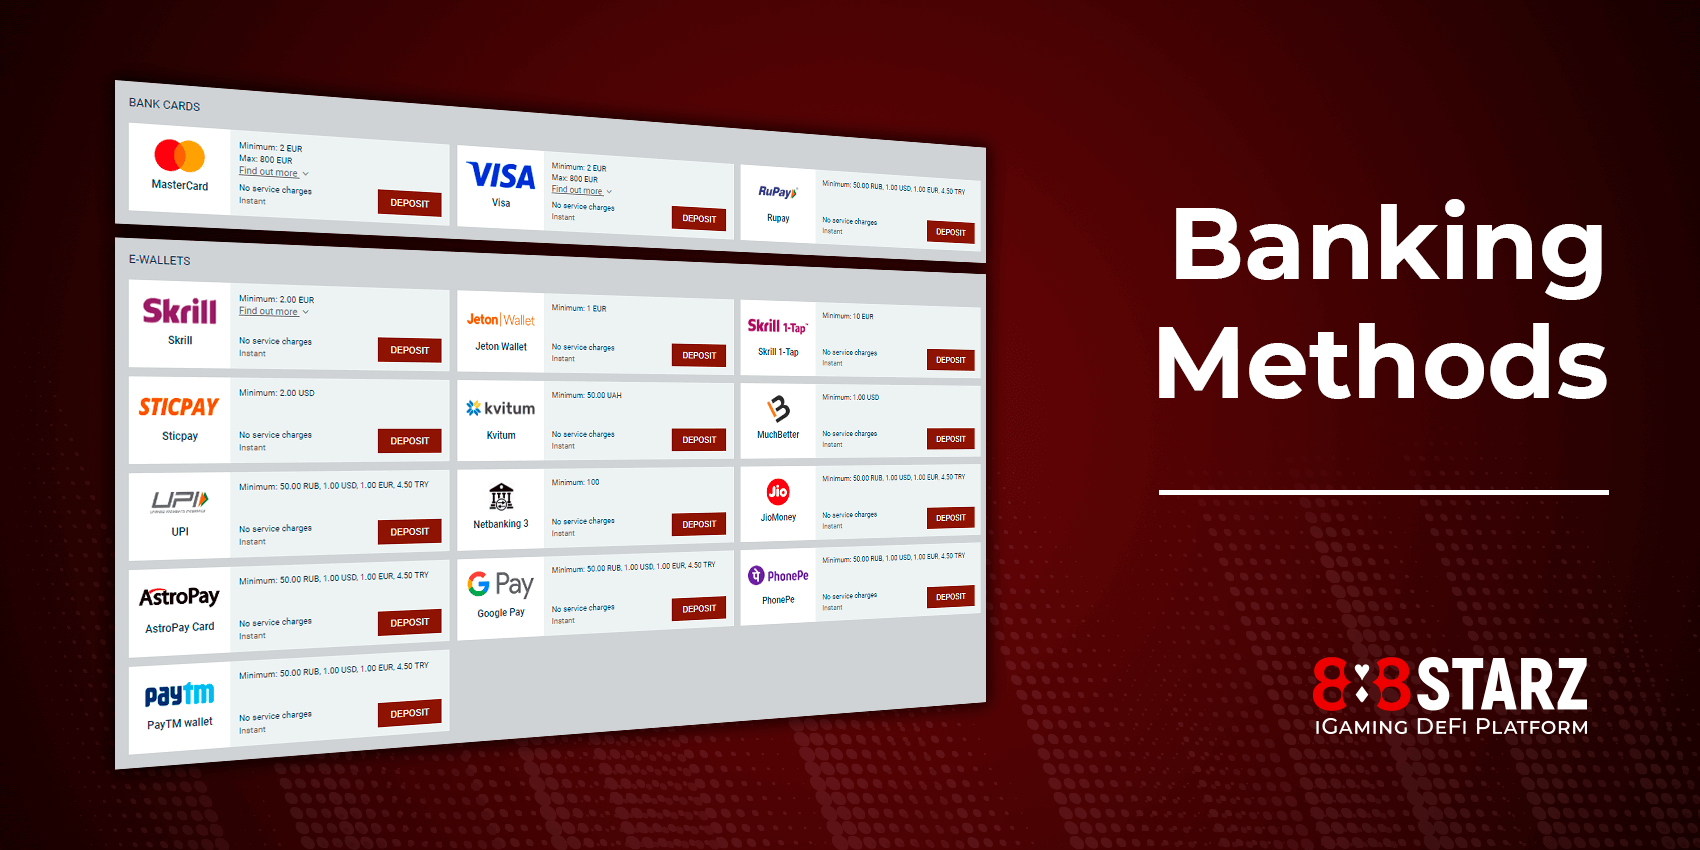 Available Banking Methods